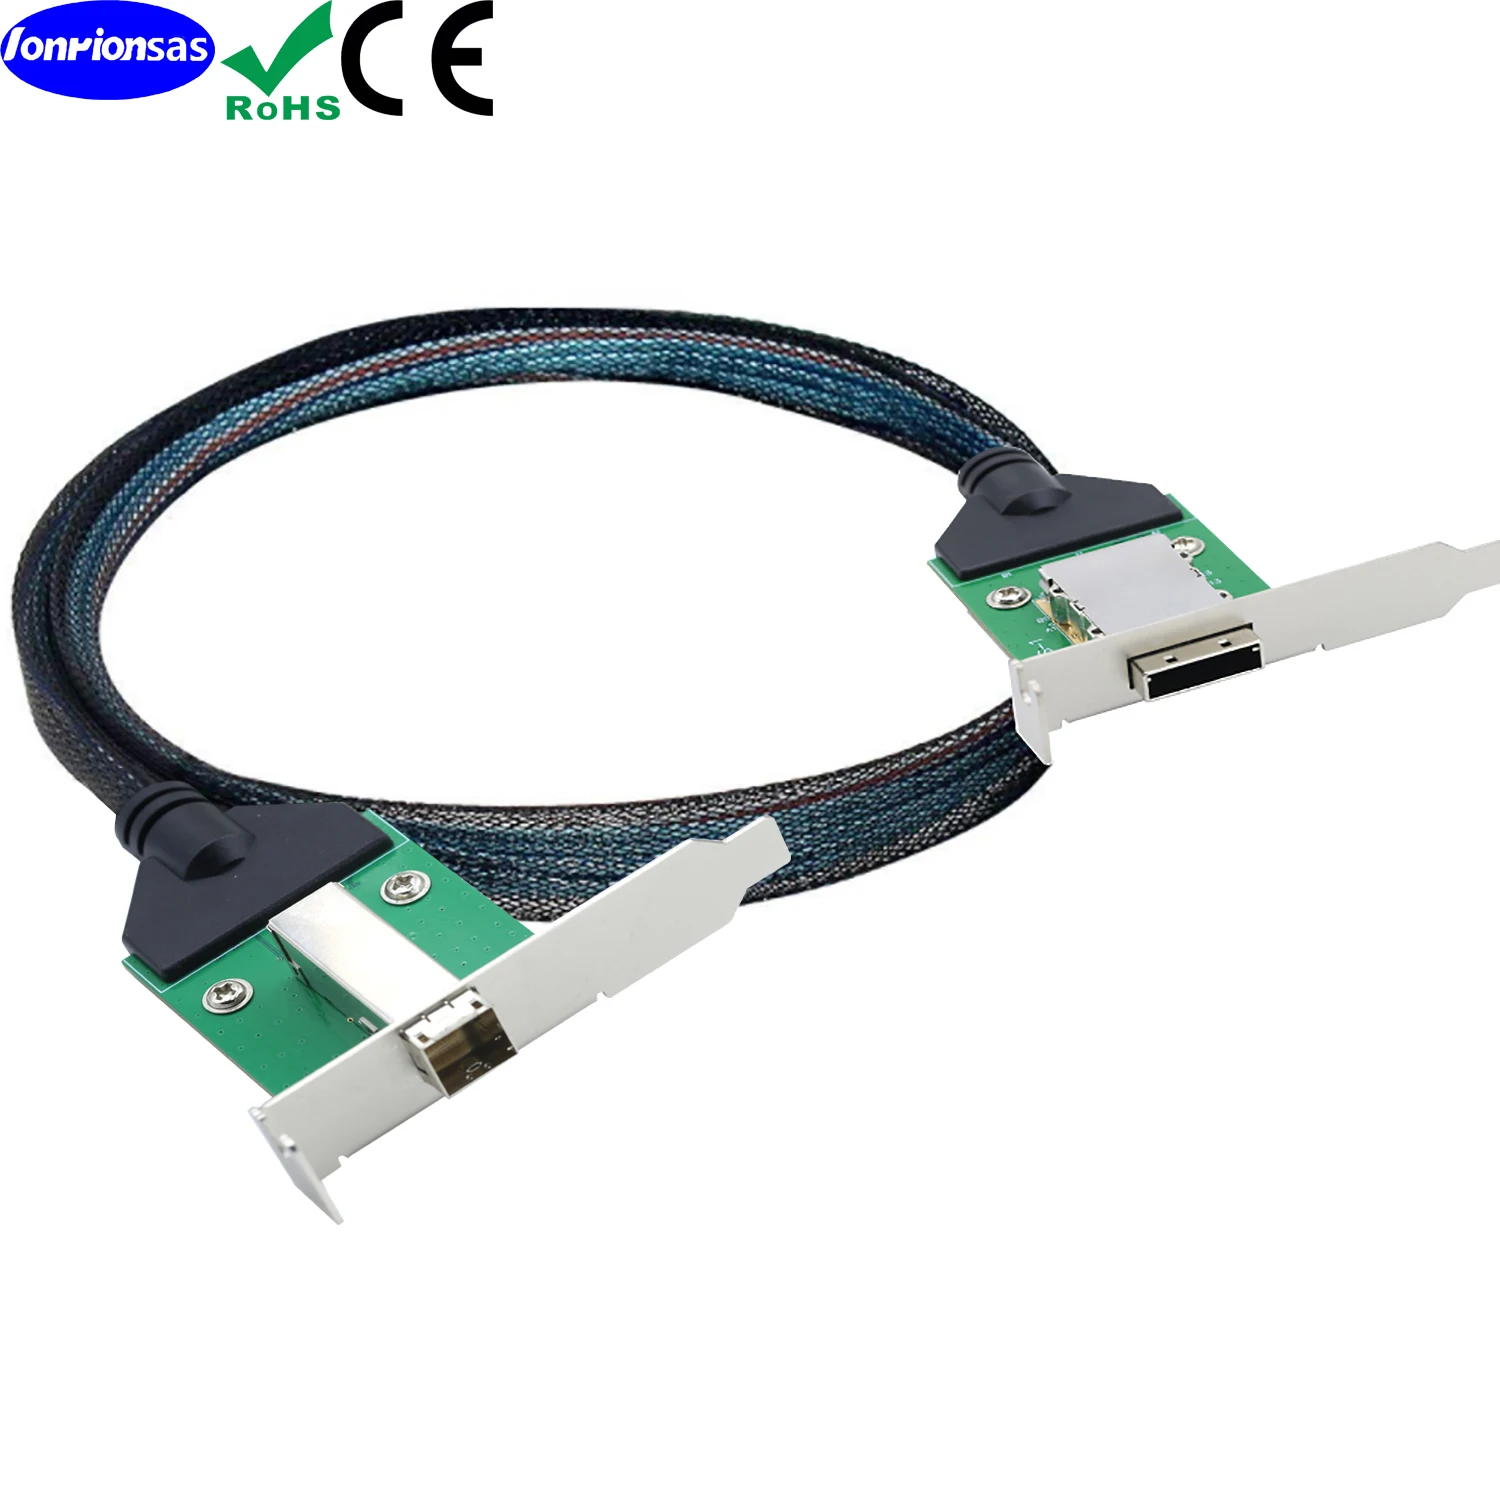 

LONRIONSAS#Mini SAS Extension Cable SFF-8088 26 Pin Female to External SFF-8644 Female PCBA with Low Profile Bracket cable